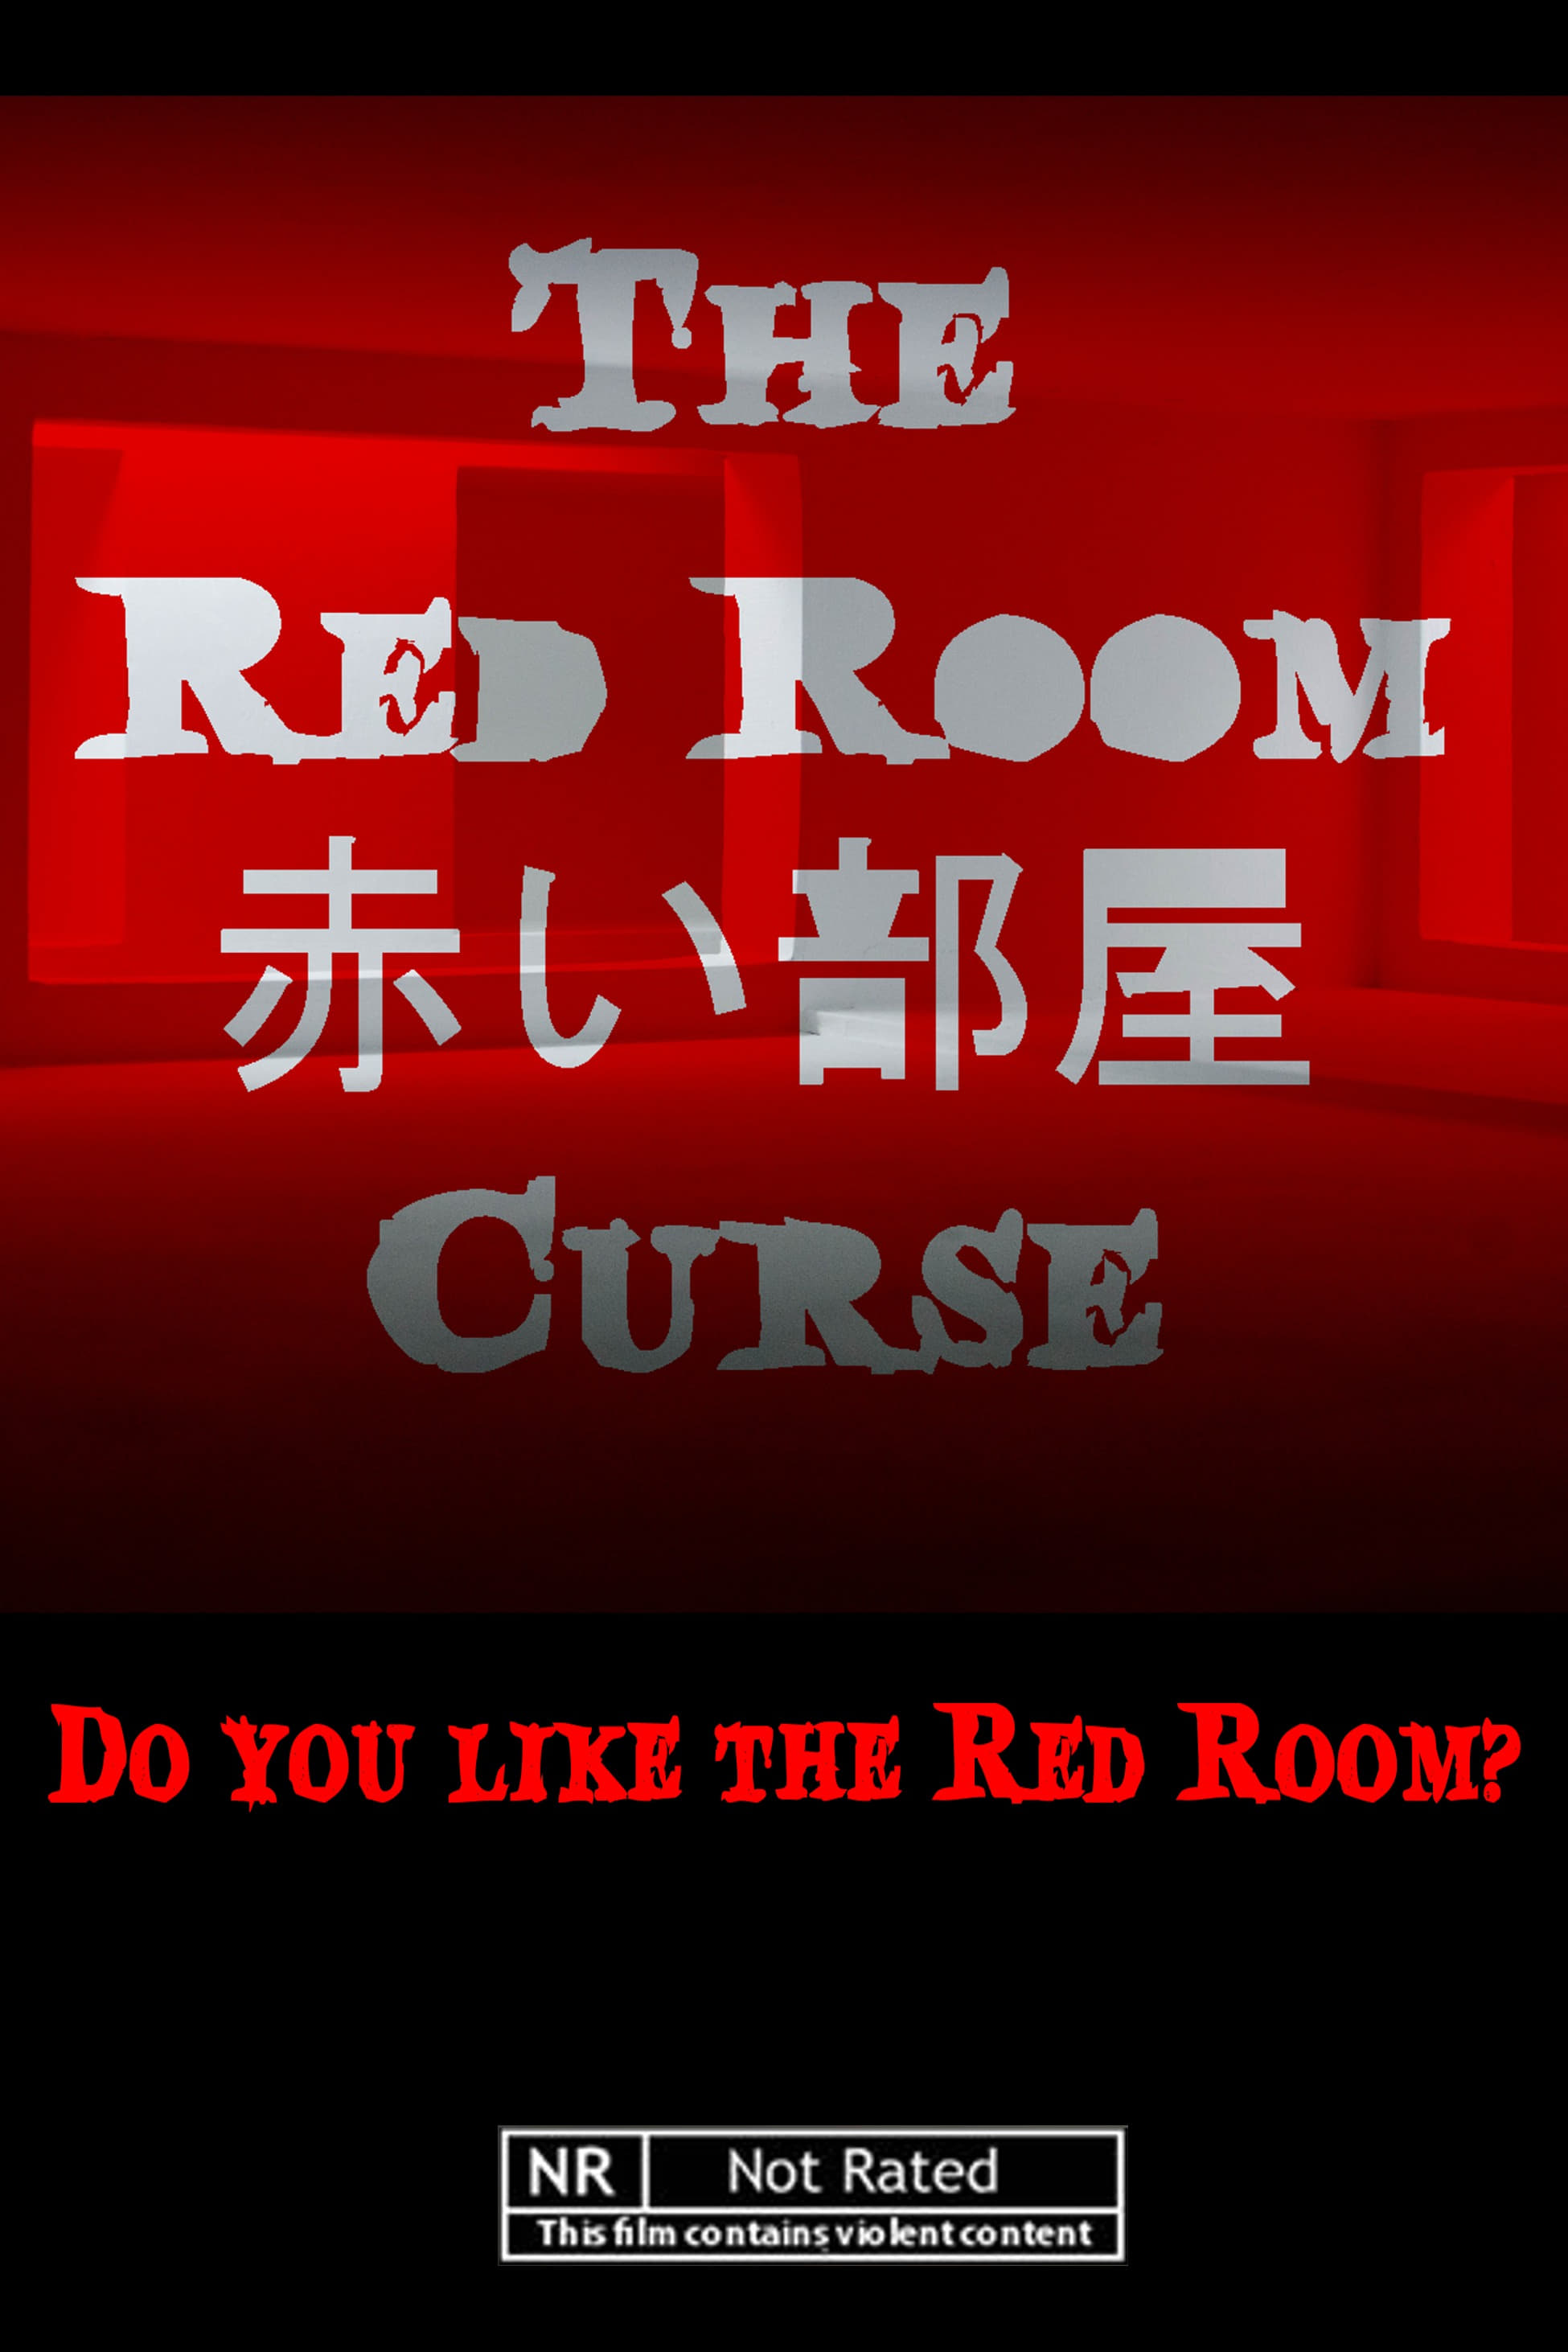 The Red Room Curse